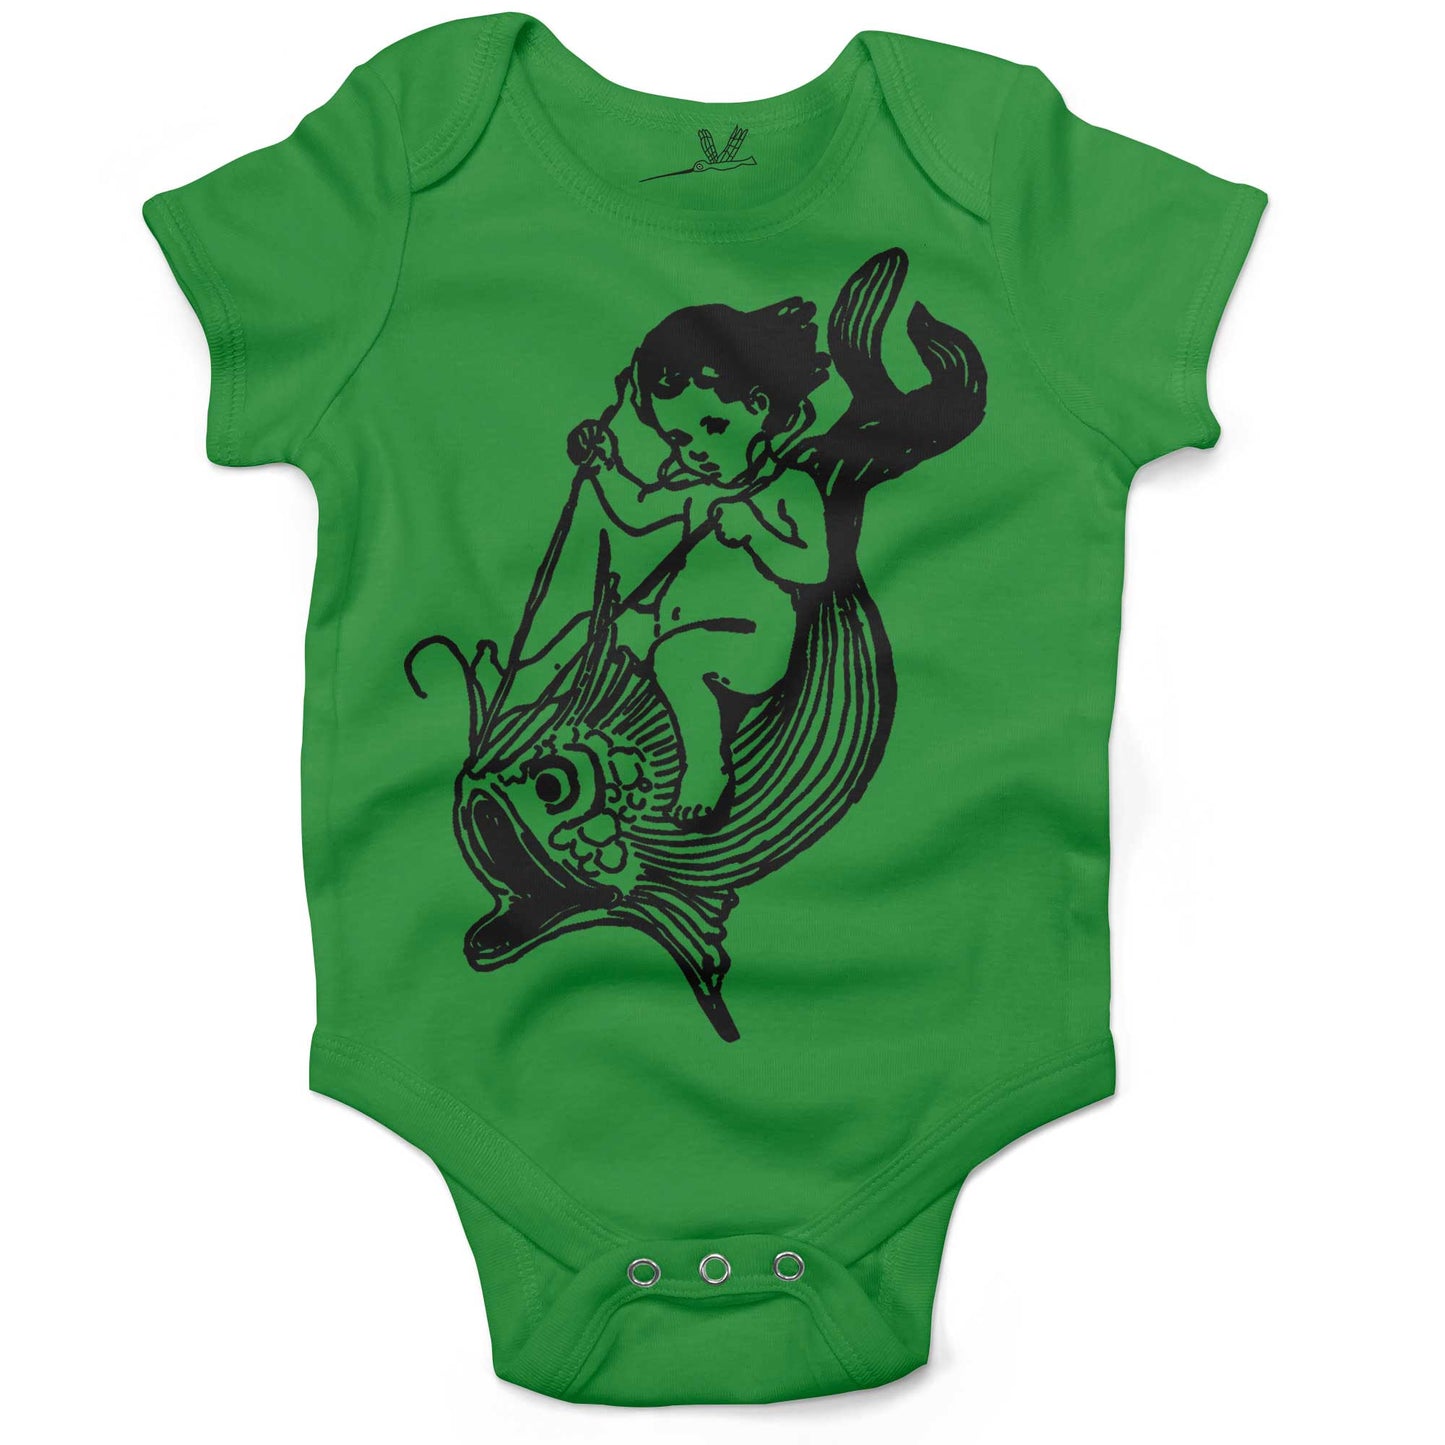 Water Baby Riding A Giant Fish Infant Bodysuit or Raglan Tee-Grass Green-3-6 months